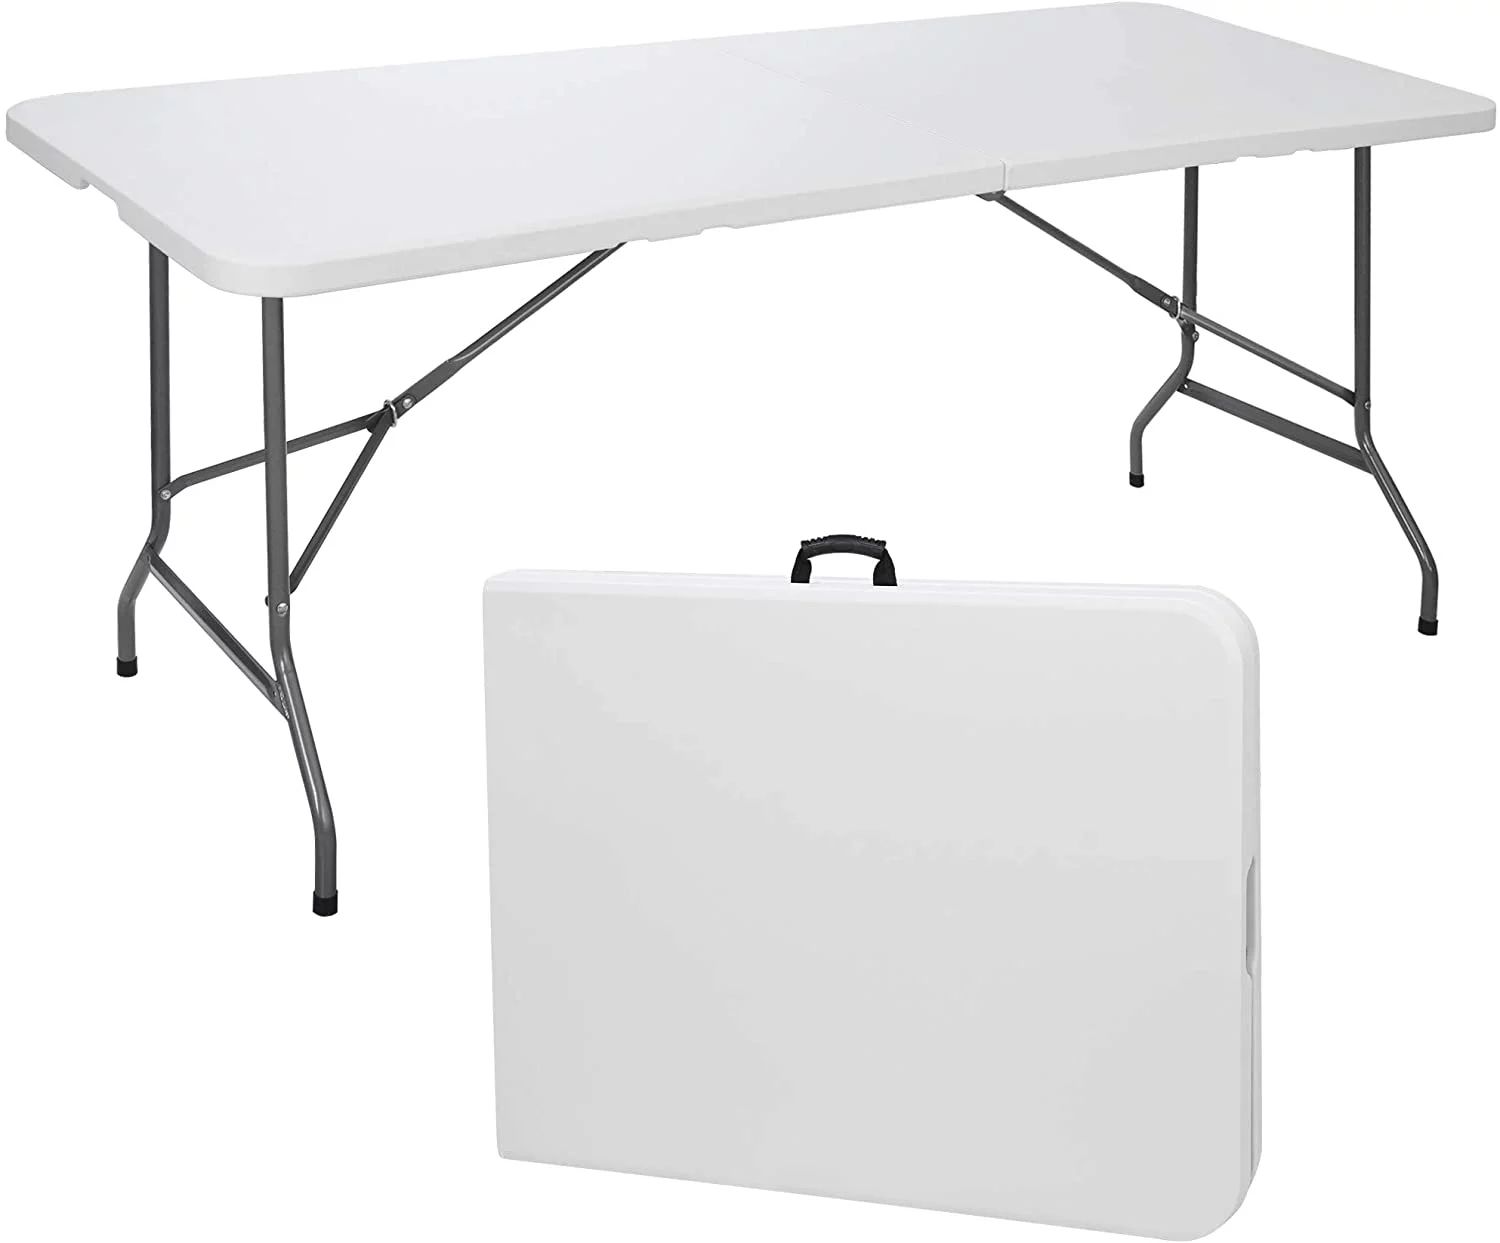 SKONYON Folding Utility Table 6ft Fold-in-Half Portable Plastic Picnic Party Dining Camp Table, W... | Walmart (US)